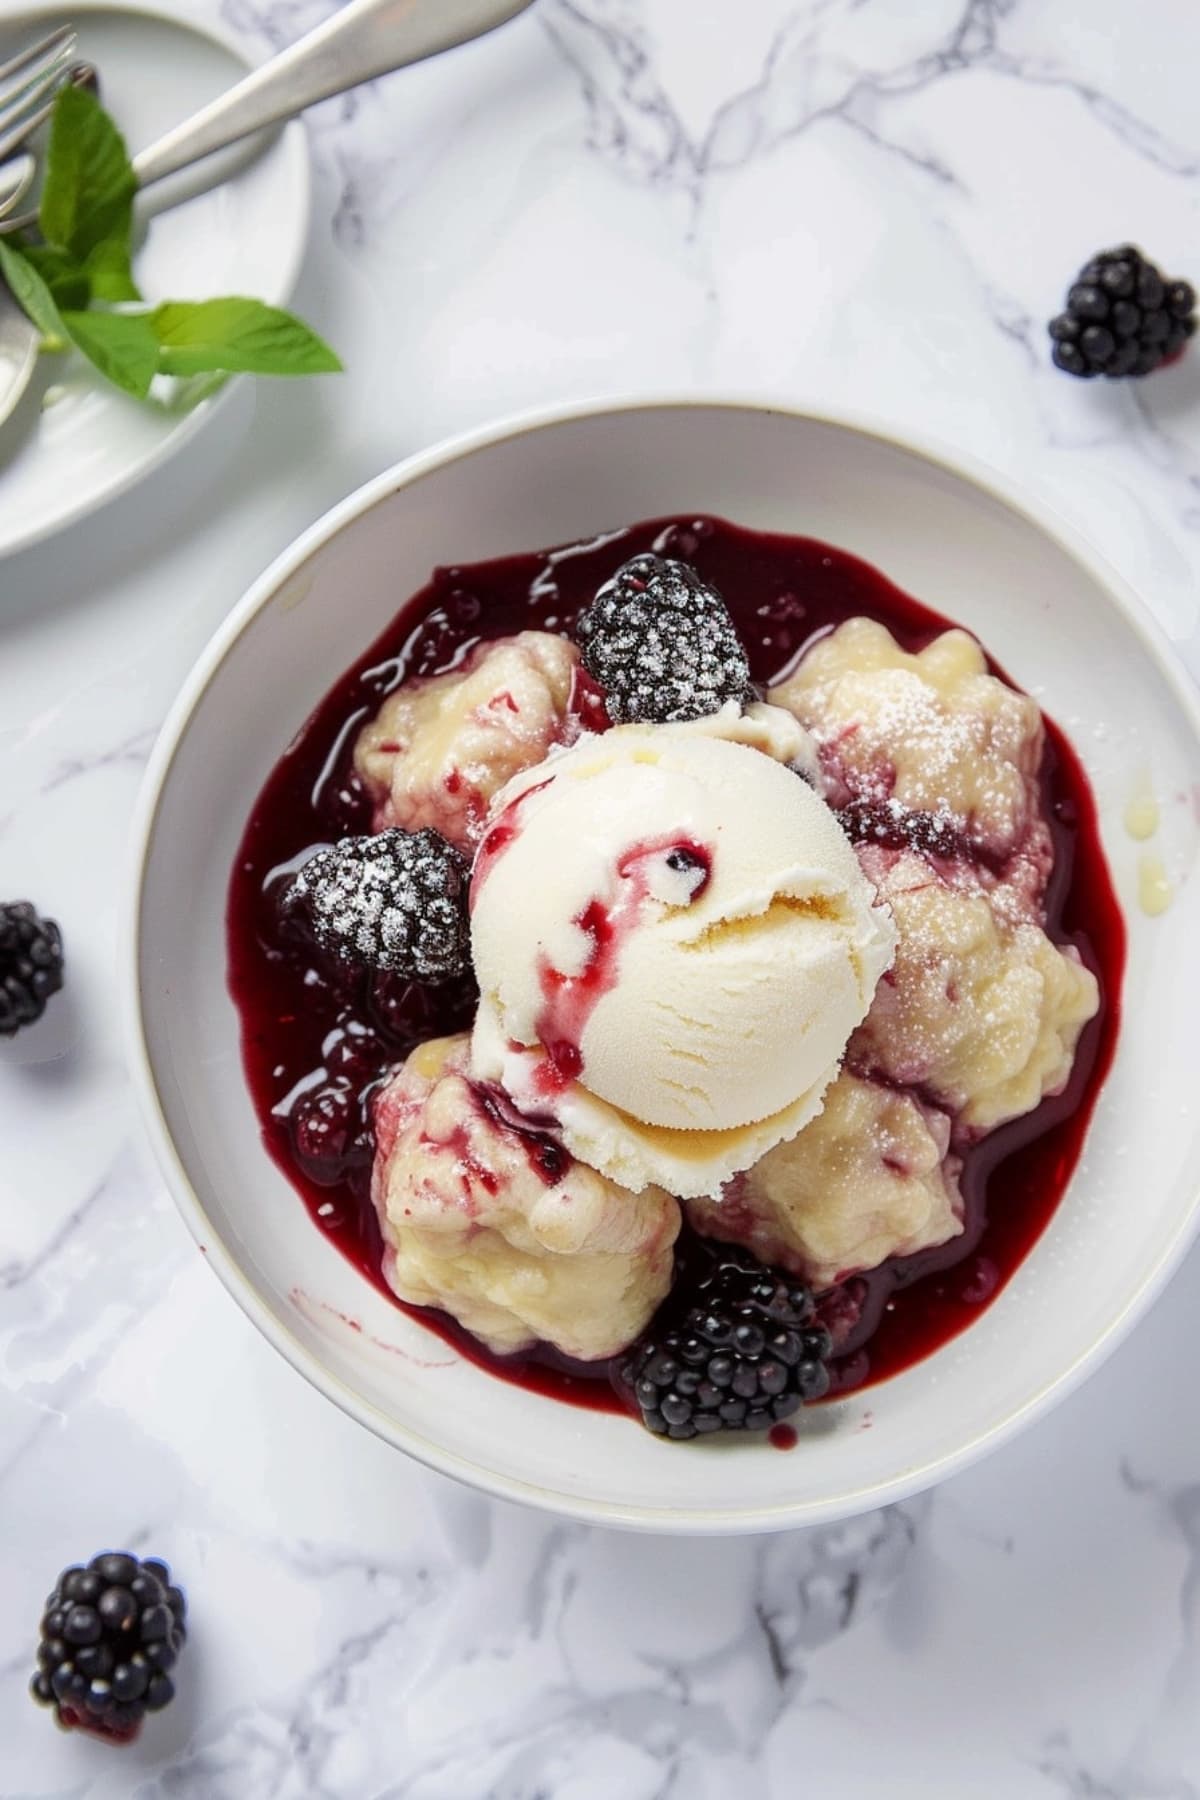 Top view of a serving of blackberry dumplings in a white bowl served with vanilla ice cream.